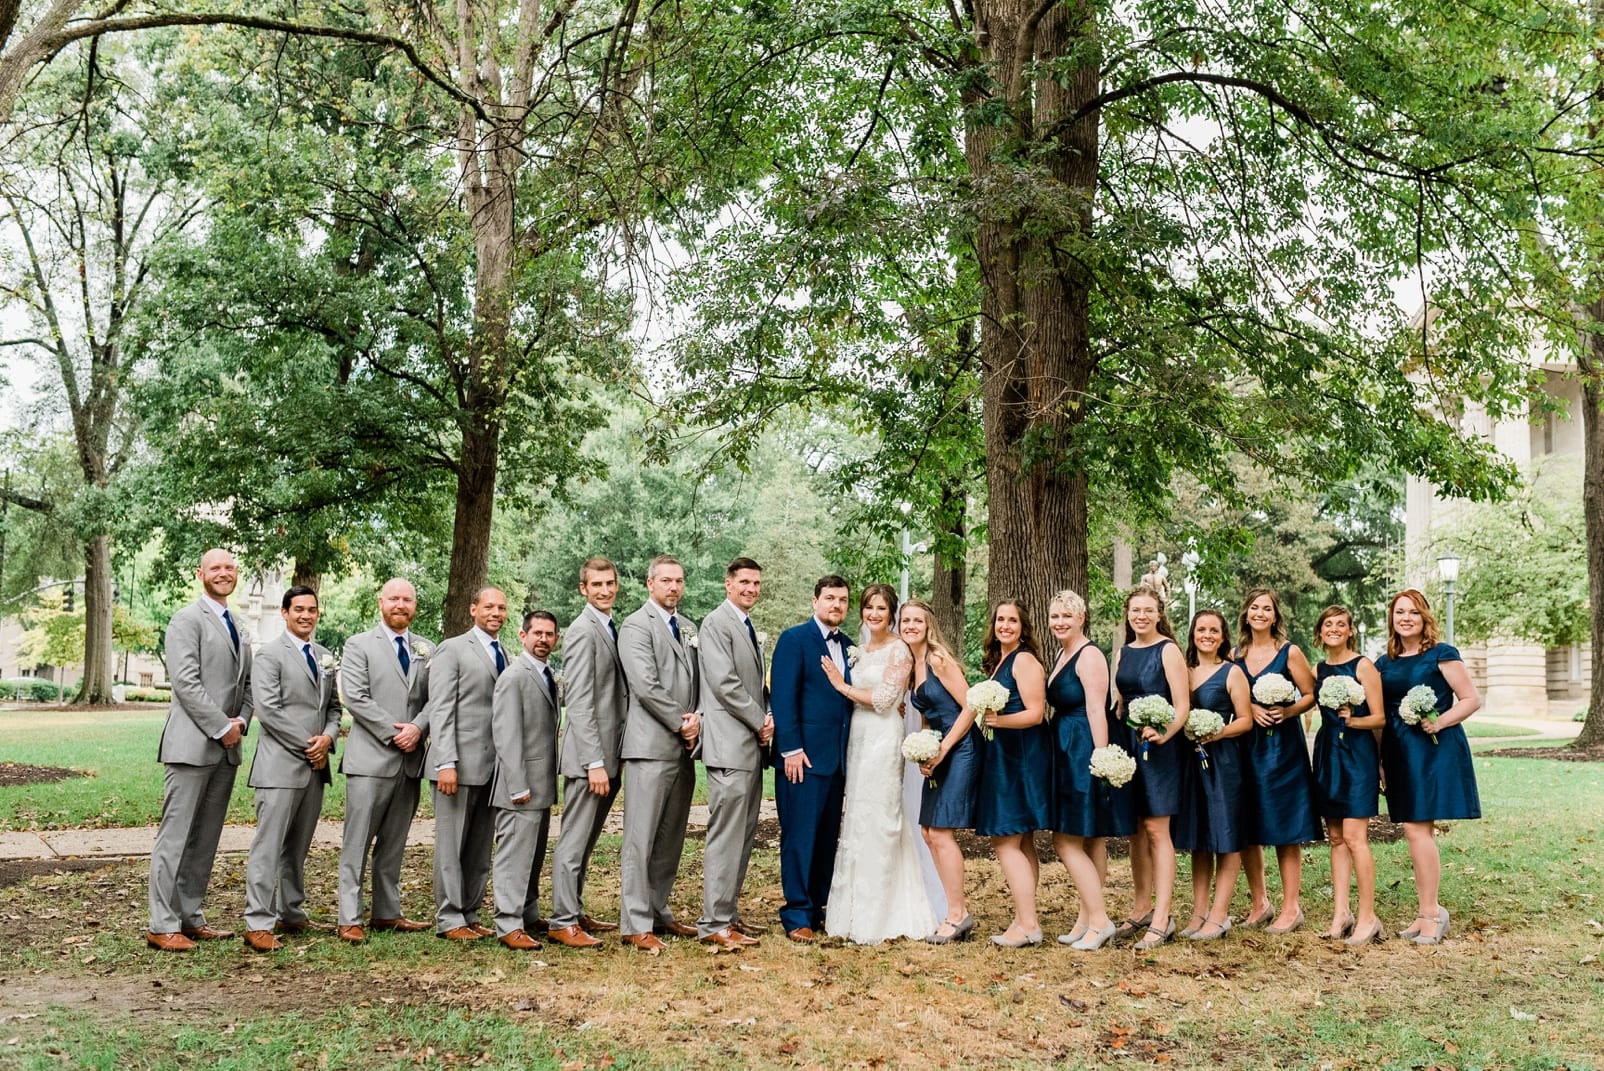 The North Carolina Capital Grounds wedding party picture with groomsmen in gray suits and bridesmaids in navy blue dresses photo